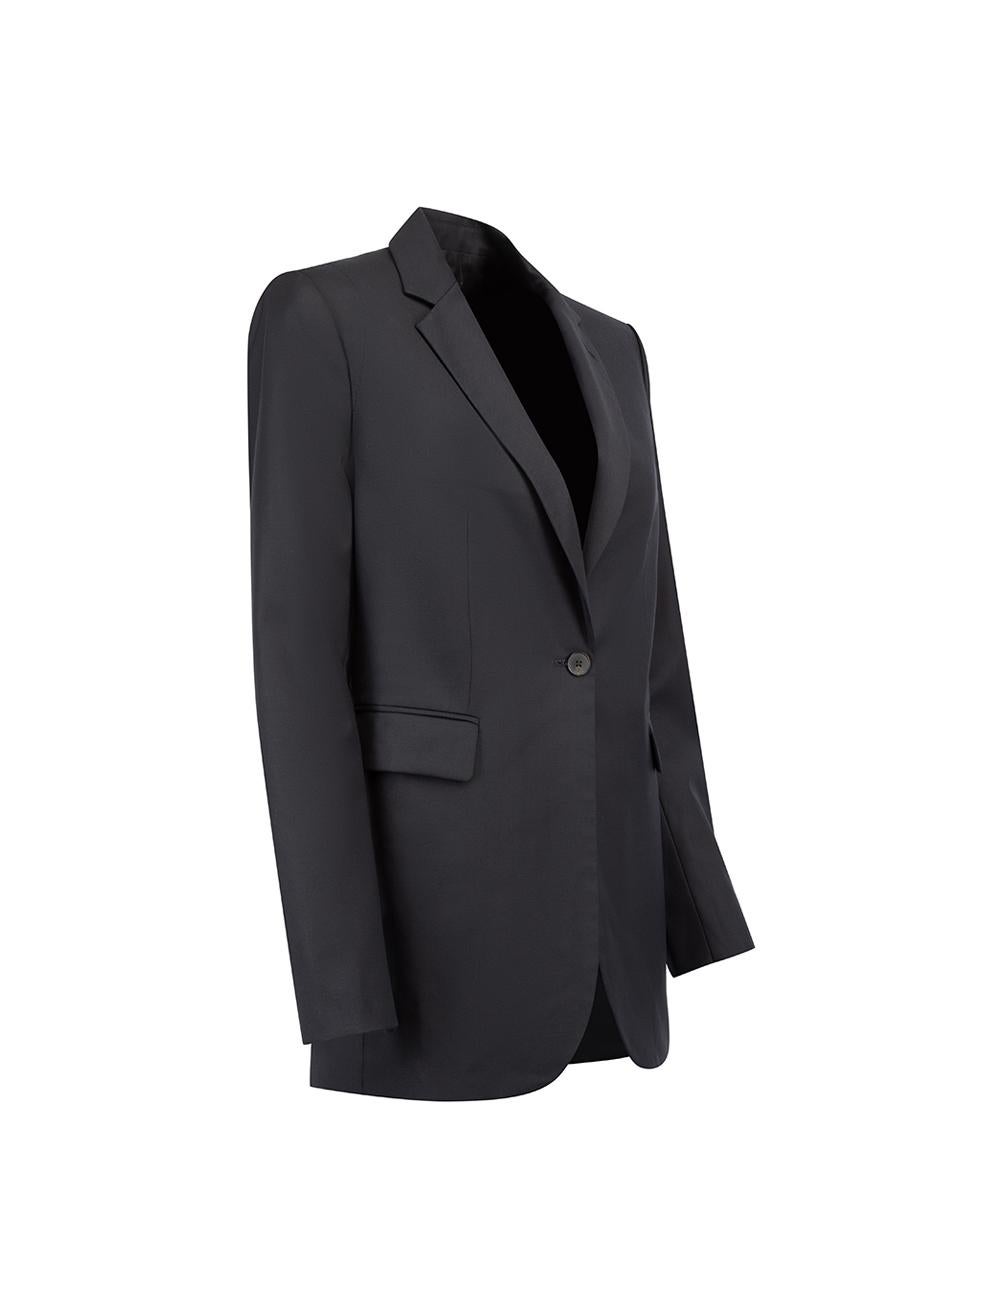 CONDITION is Very good. Minimal wear to blazer is evident. Minimal wear to the thread near the bottom on this Joseph designer resale item. Details Black Wool Single breasted blazer Buttoned cuffs Shoulder padded Front side pockets with flap Back